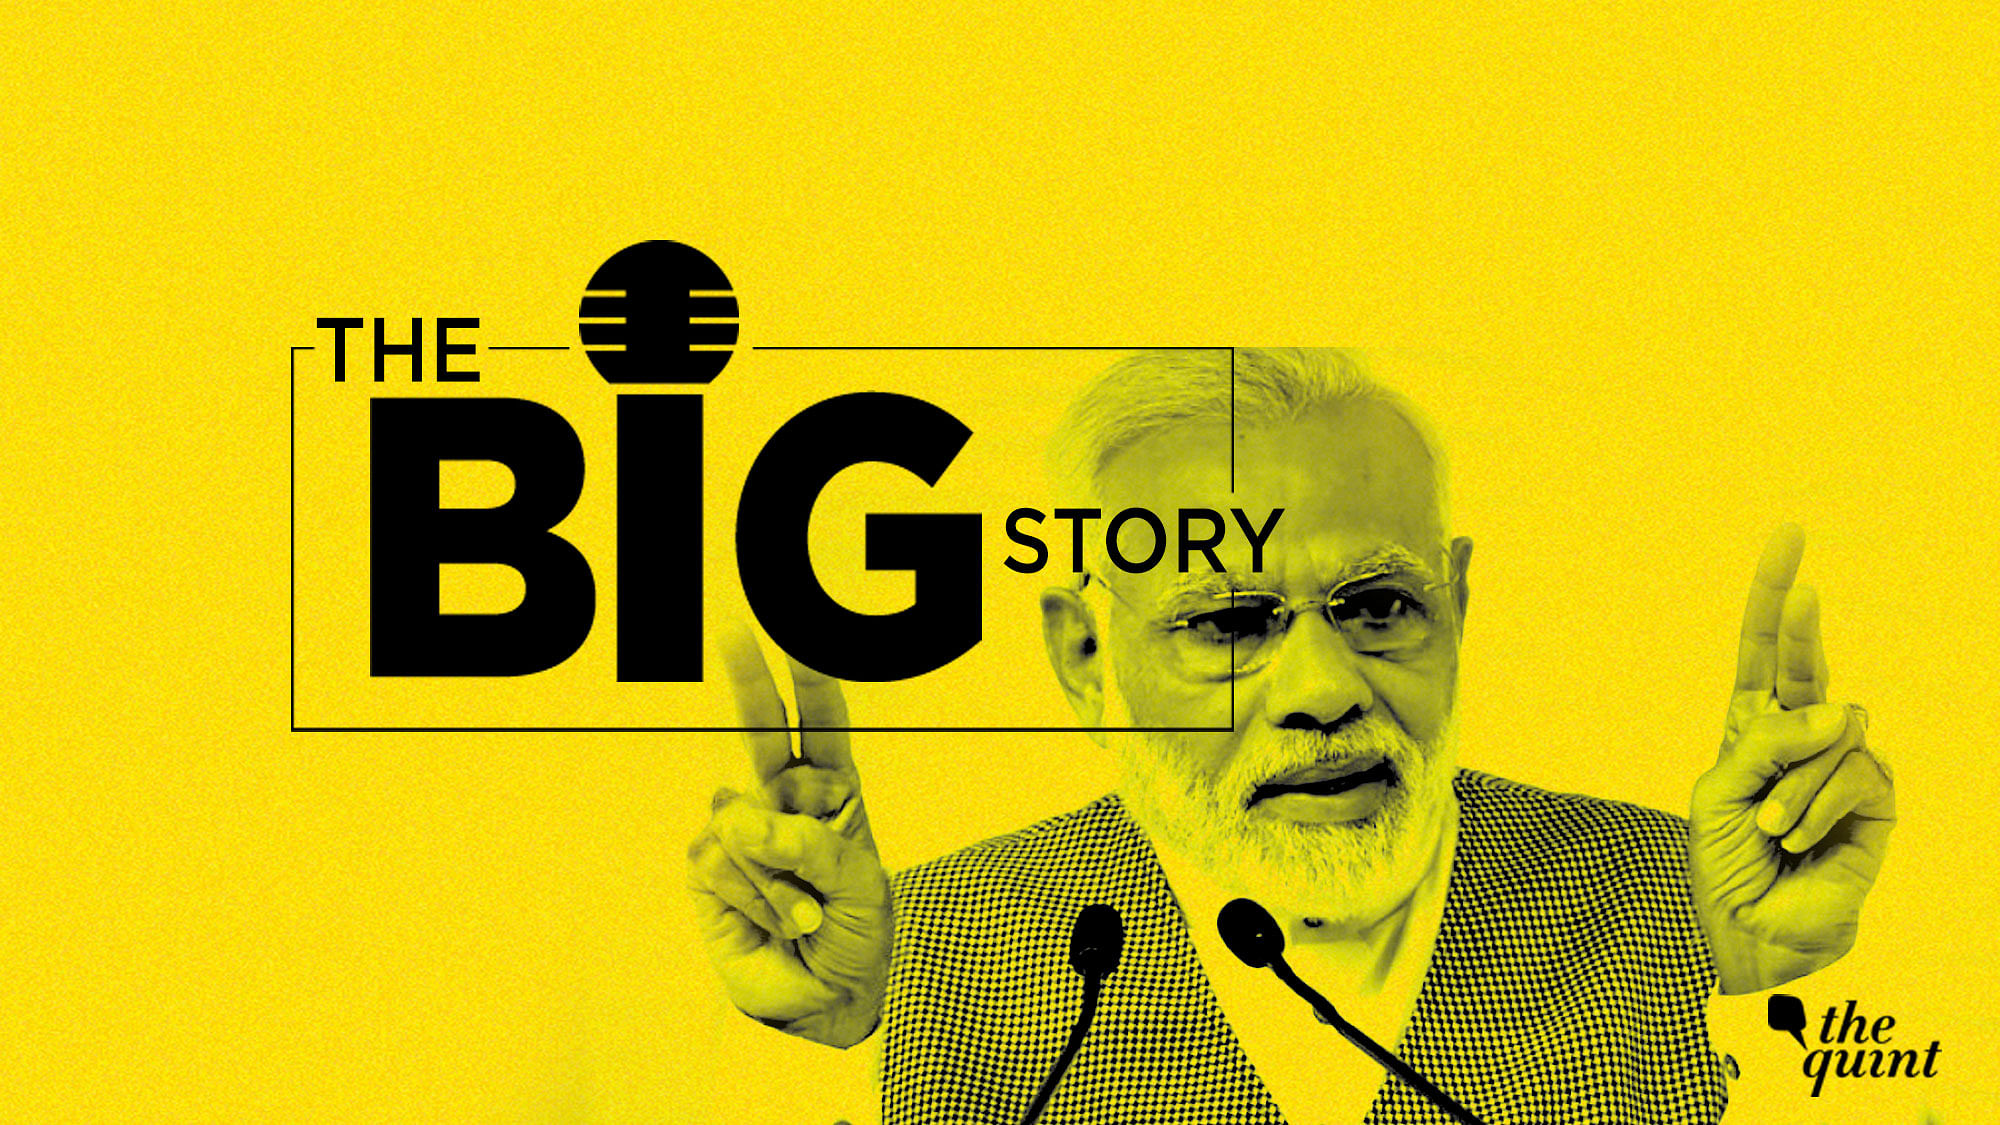 PM Modi’s press conference/media interaction is the big story of the day. Or rather, the Big Story of the day is the press conference that never was. Listen to the podcast for the full, hilarious story.